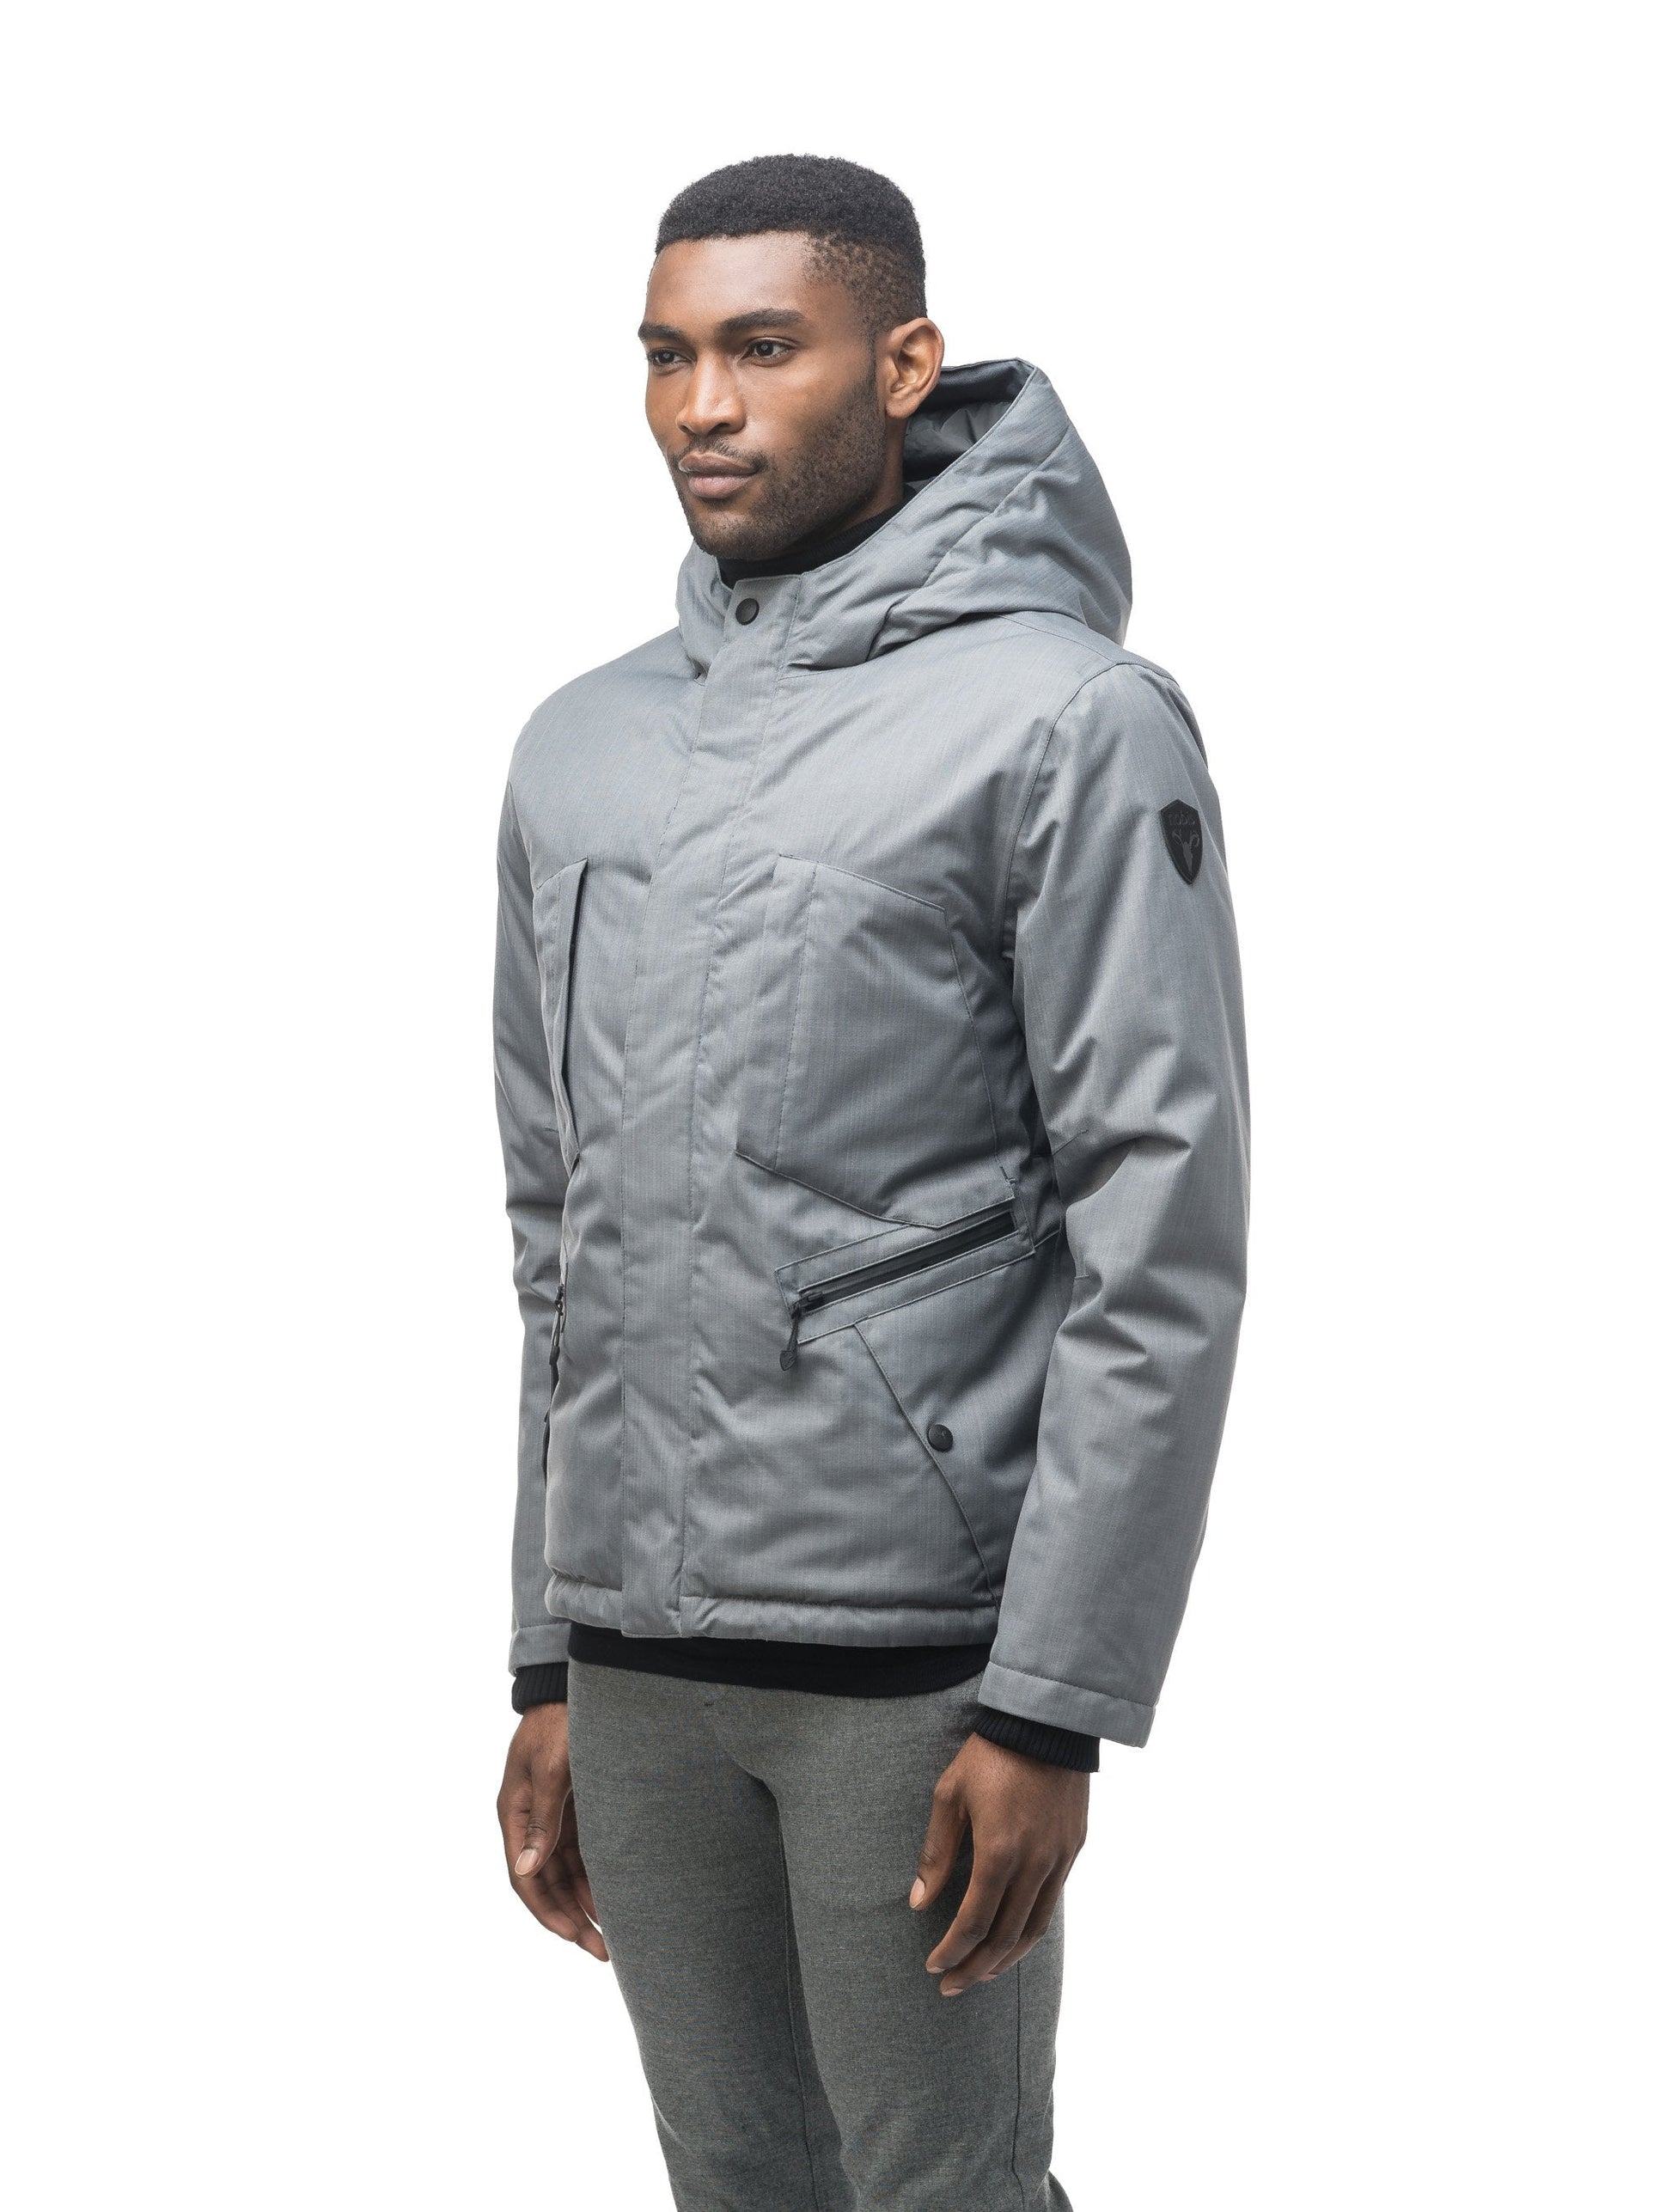 Men's waist length light down coat equipped with six exterior pockets and a hood in Concrete